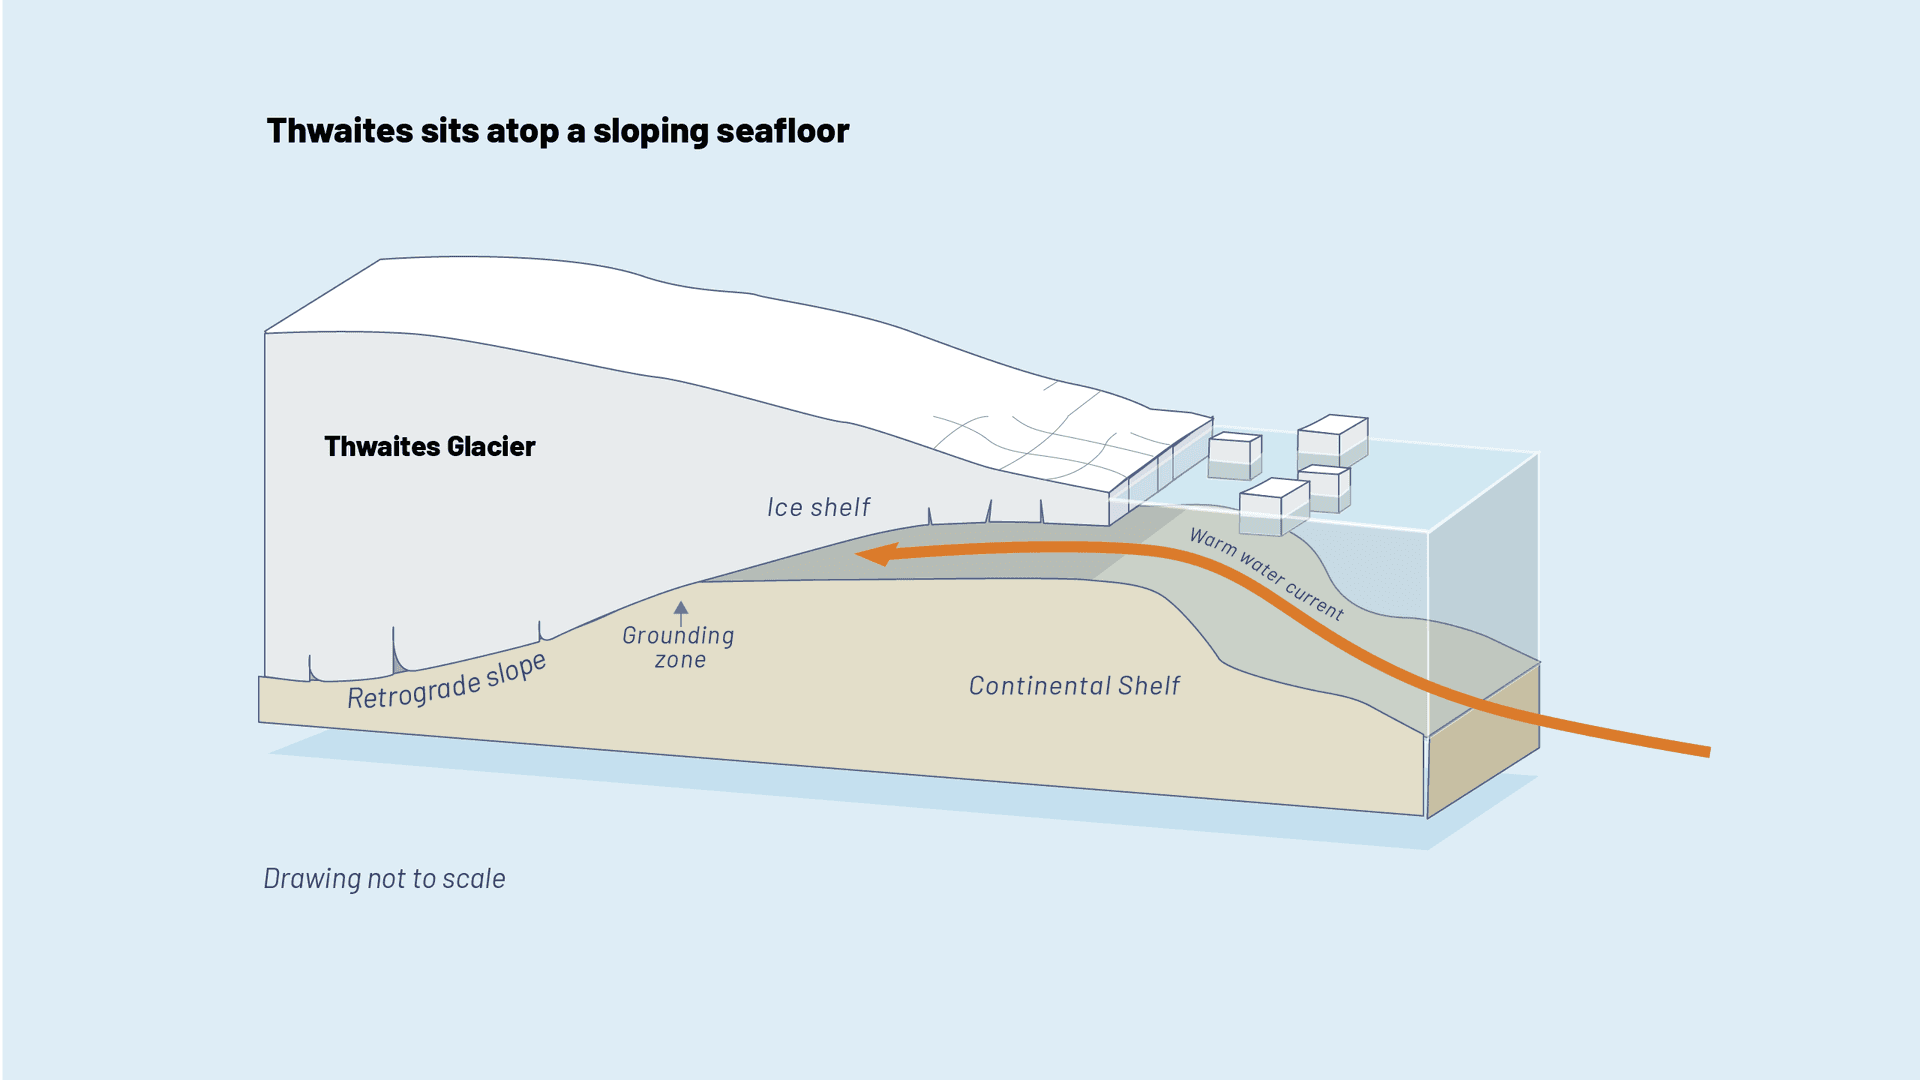 An illustration shows a sideview of Thwaites glacier, the grounding line and the retroglade slope